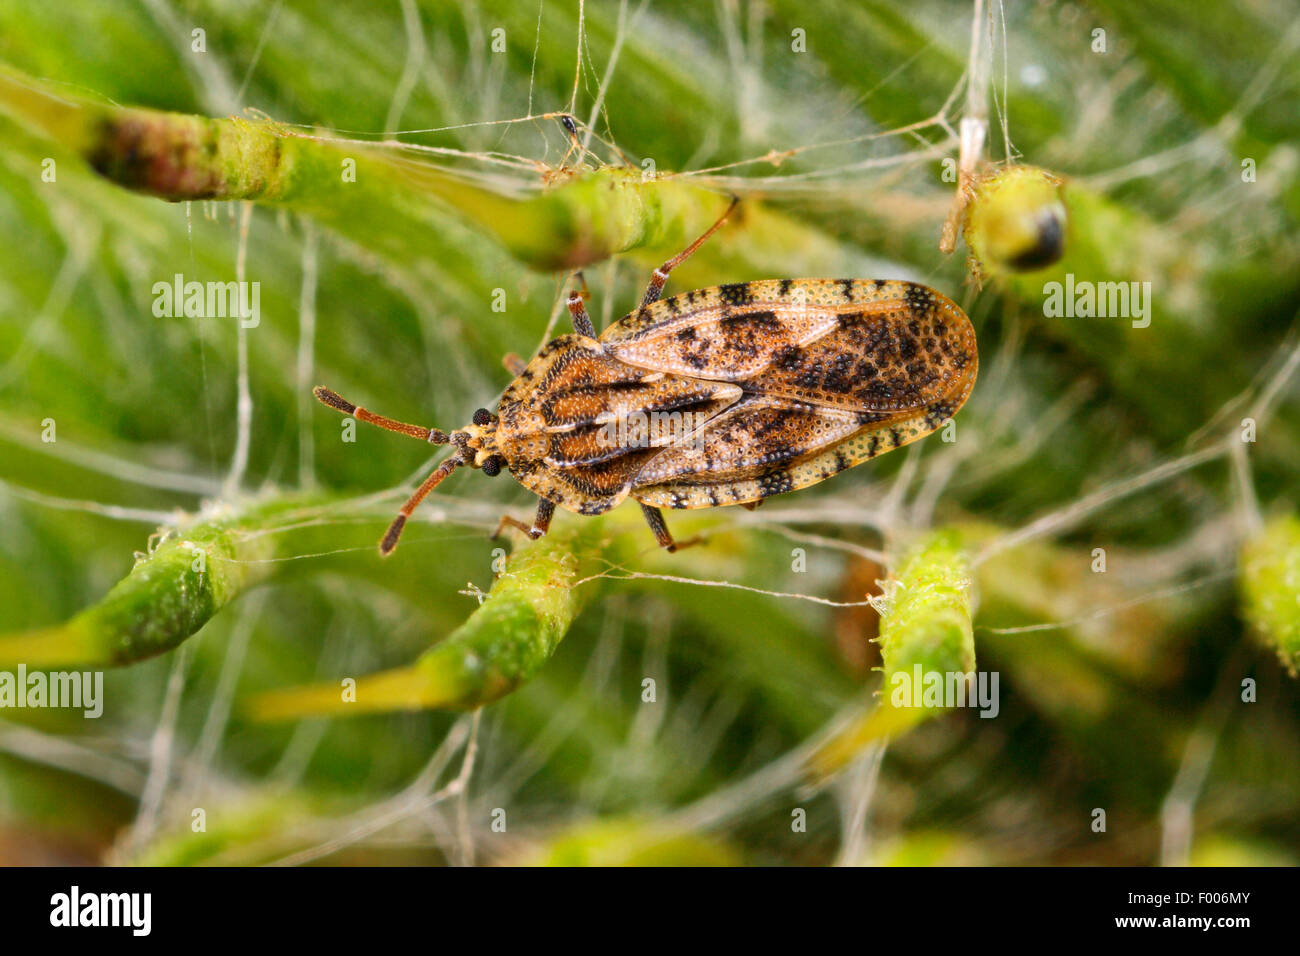 Spear thistle lacebug, Spear thistle lace bug (Tingis cardui), sitting on a plant, Germany Stock Photo